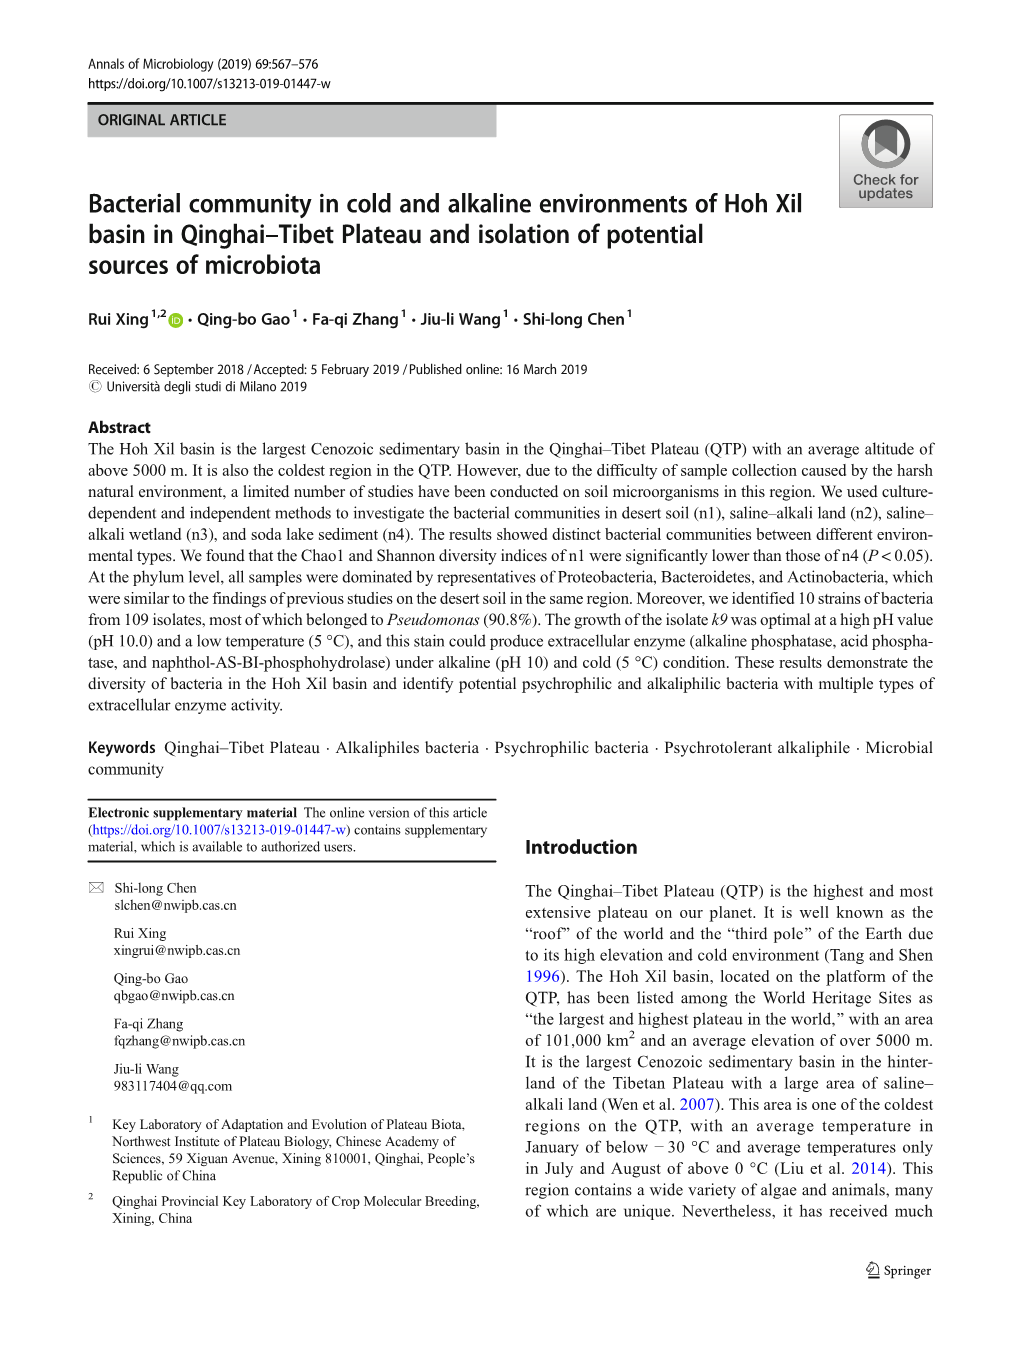 Bacterial Community in Cold and Alkaline Environments of Hoh Xil Basin in Qinghai–Tibet Plateau and Isolation of Potential Sources of Microbiota